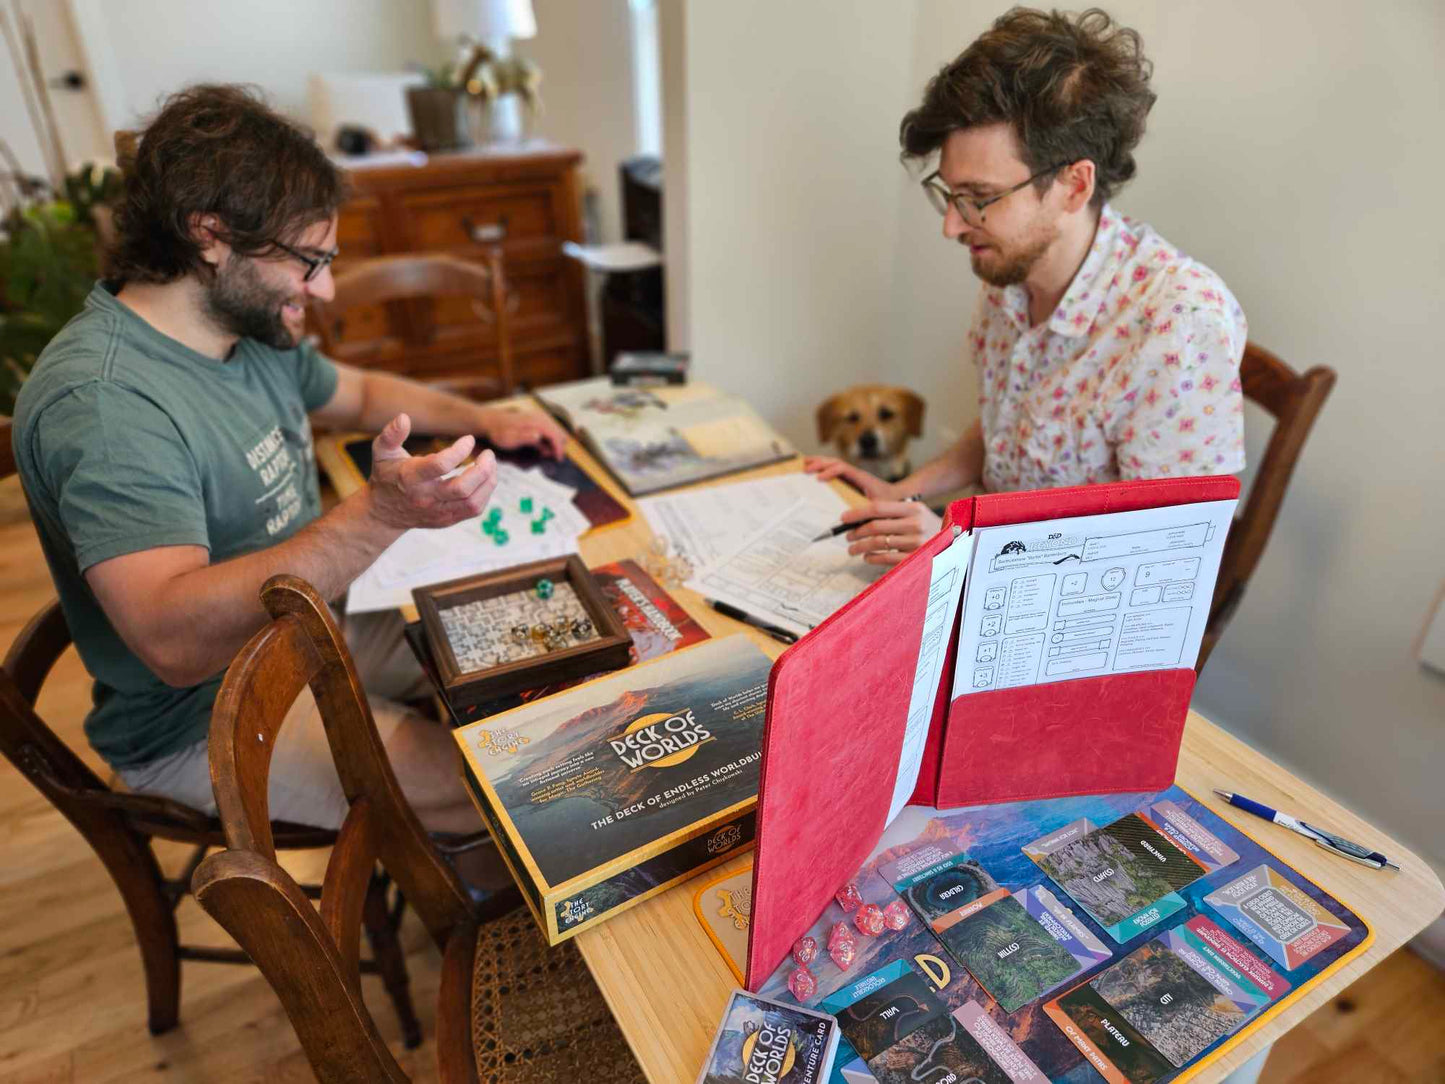 Dungeon Master and TTRPG player playing D&D in a fantasy setting generated with Deck of Worlds worldbuilding prompts